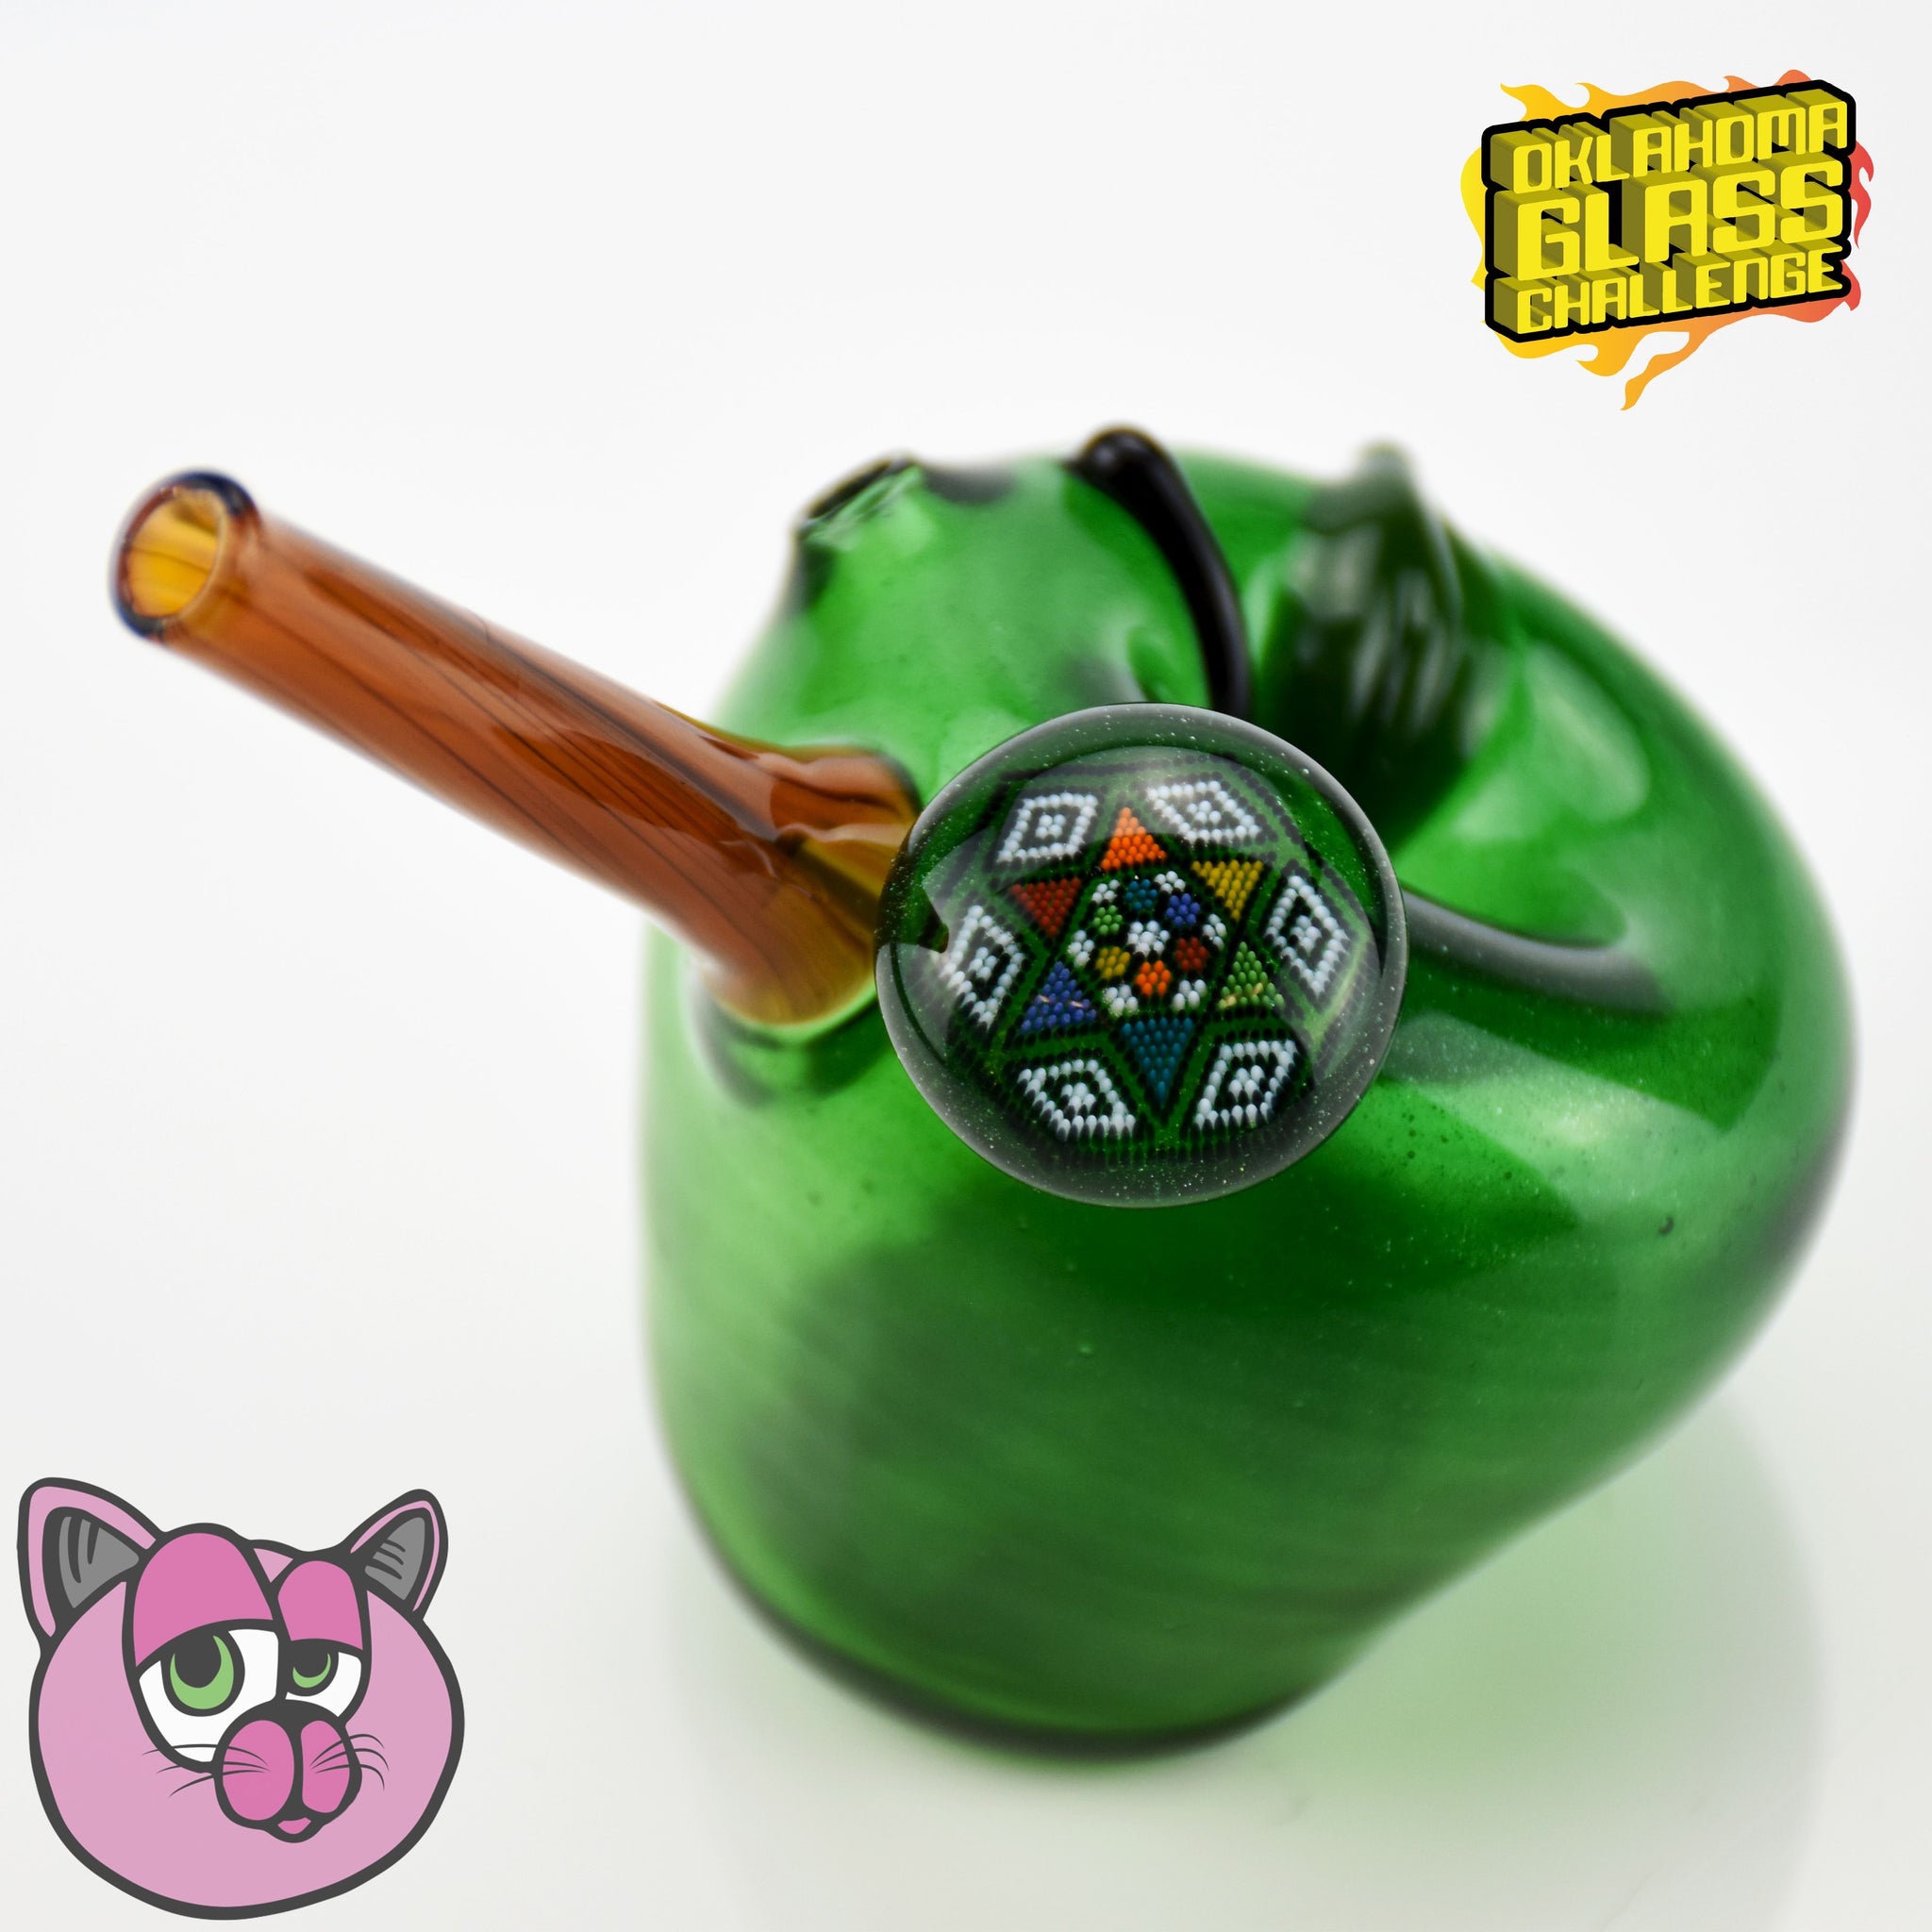 Glass by Boots x Newob Glass x Leary Glass x Jmass Glass Apple Pipe